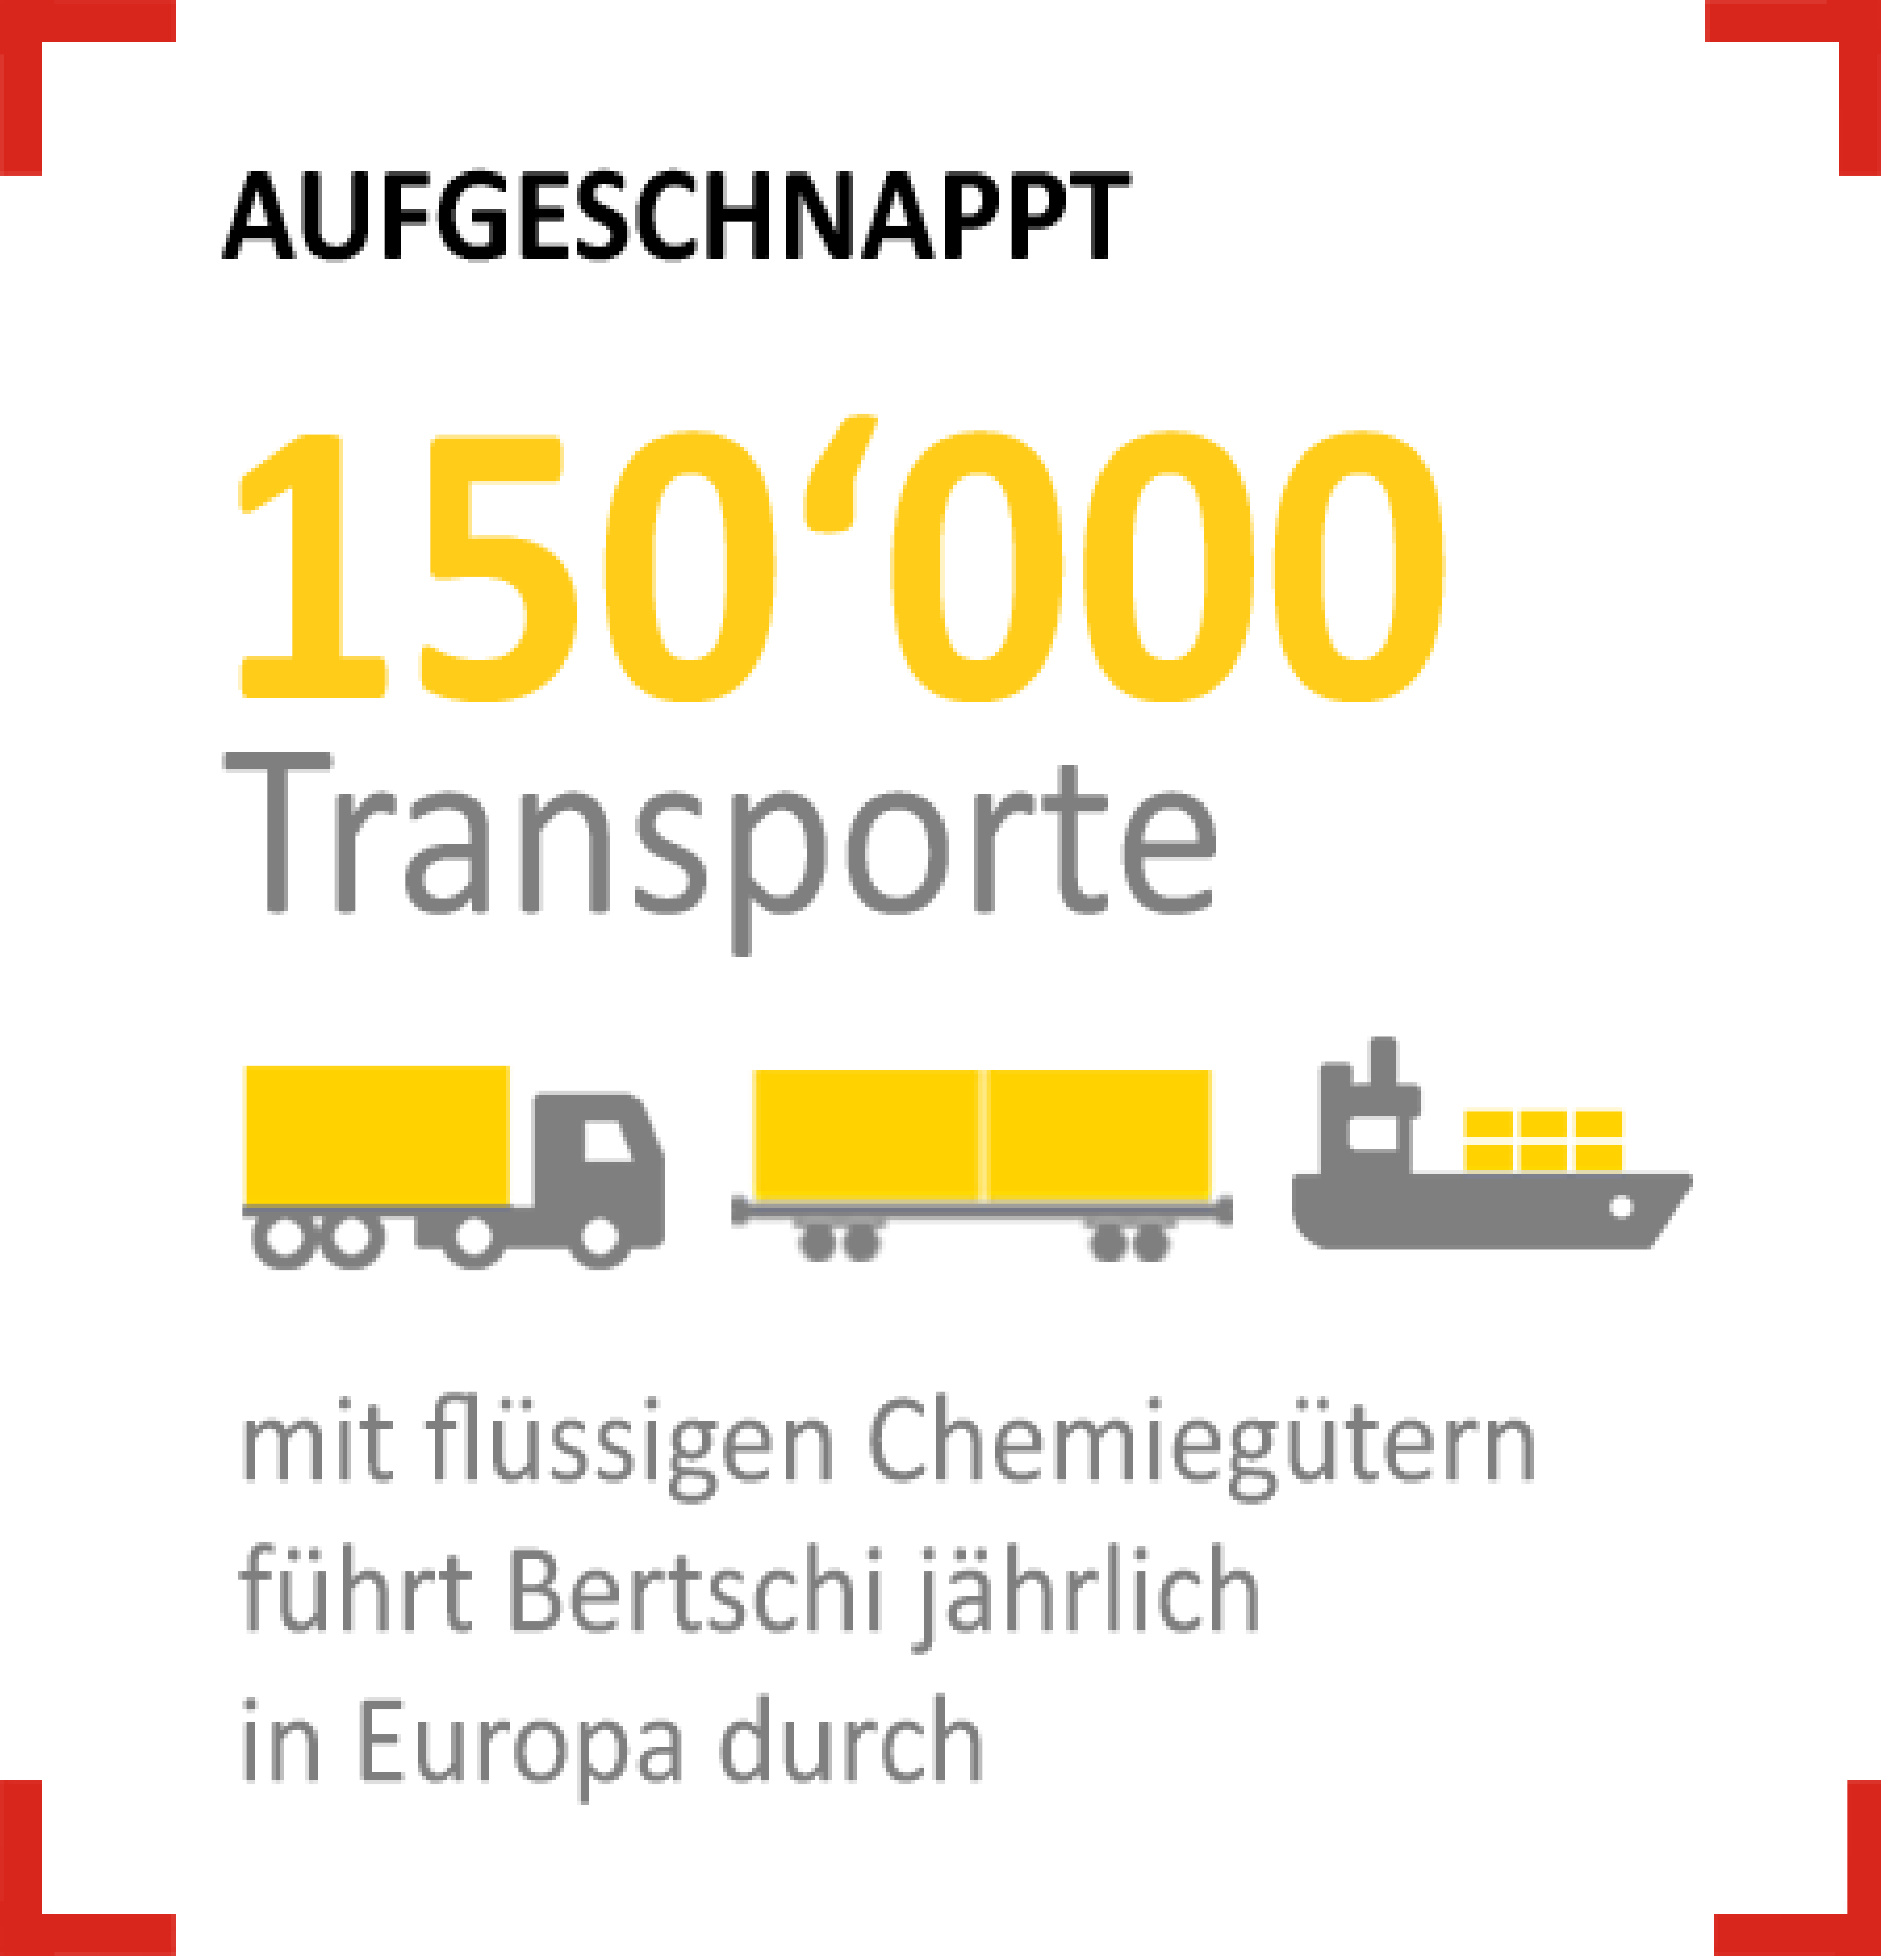 Liquids 150'000 yearly transports figures